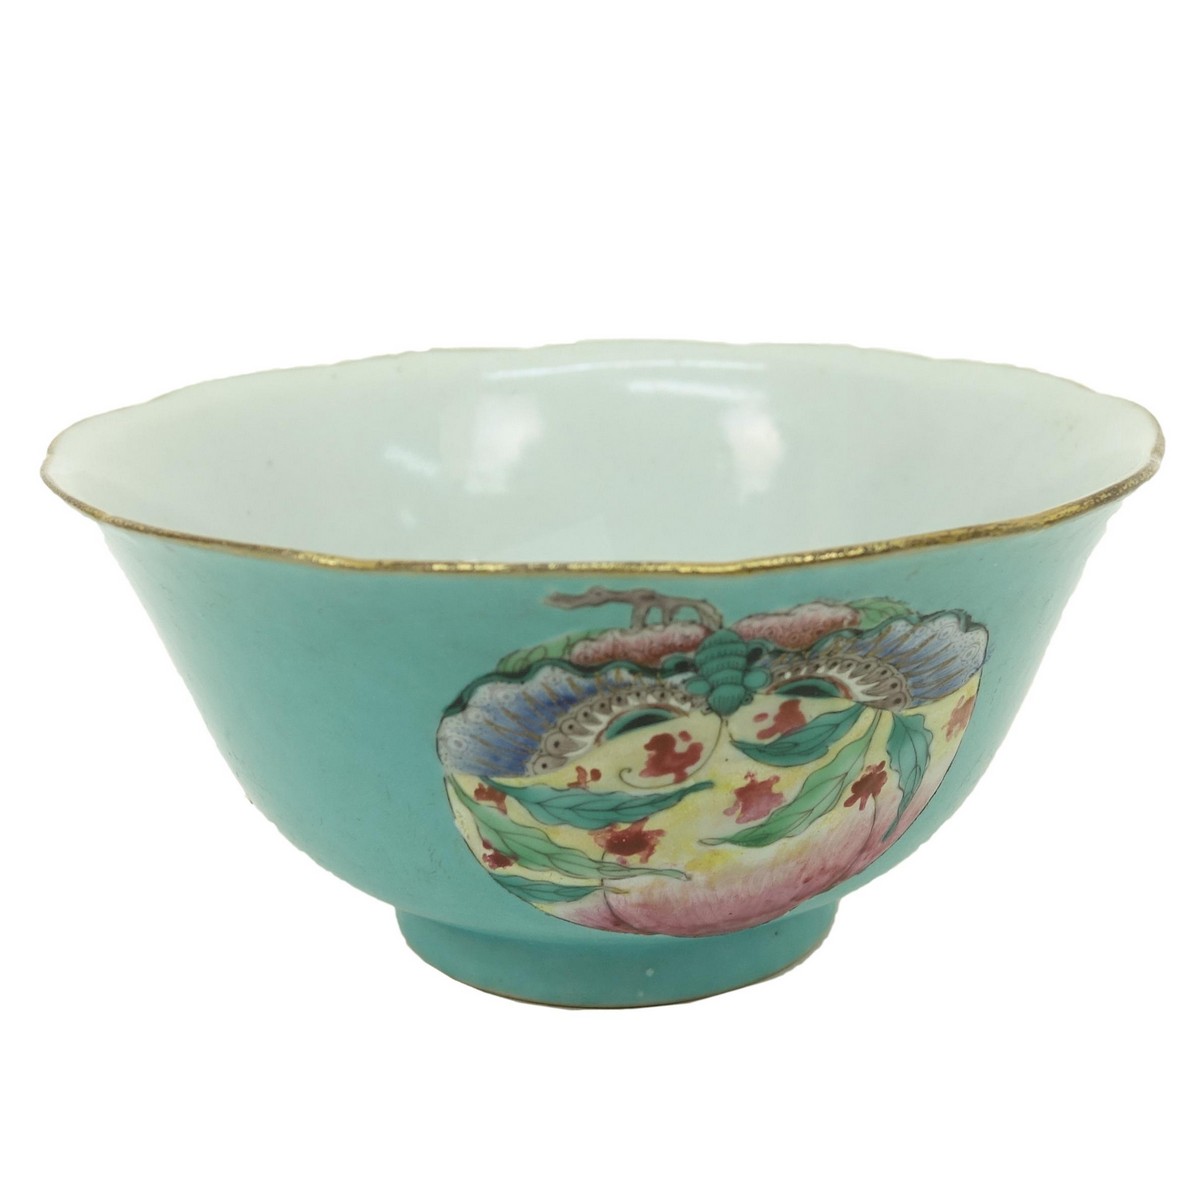 Antique Chinese Turquoise Ground Porcelain Bowl